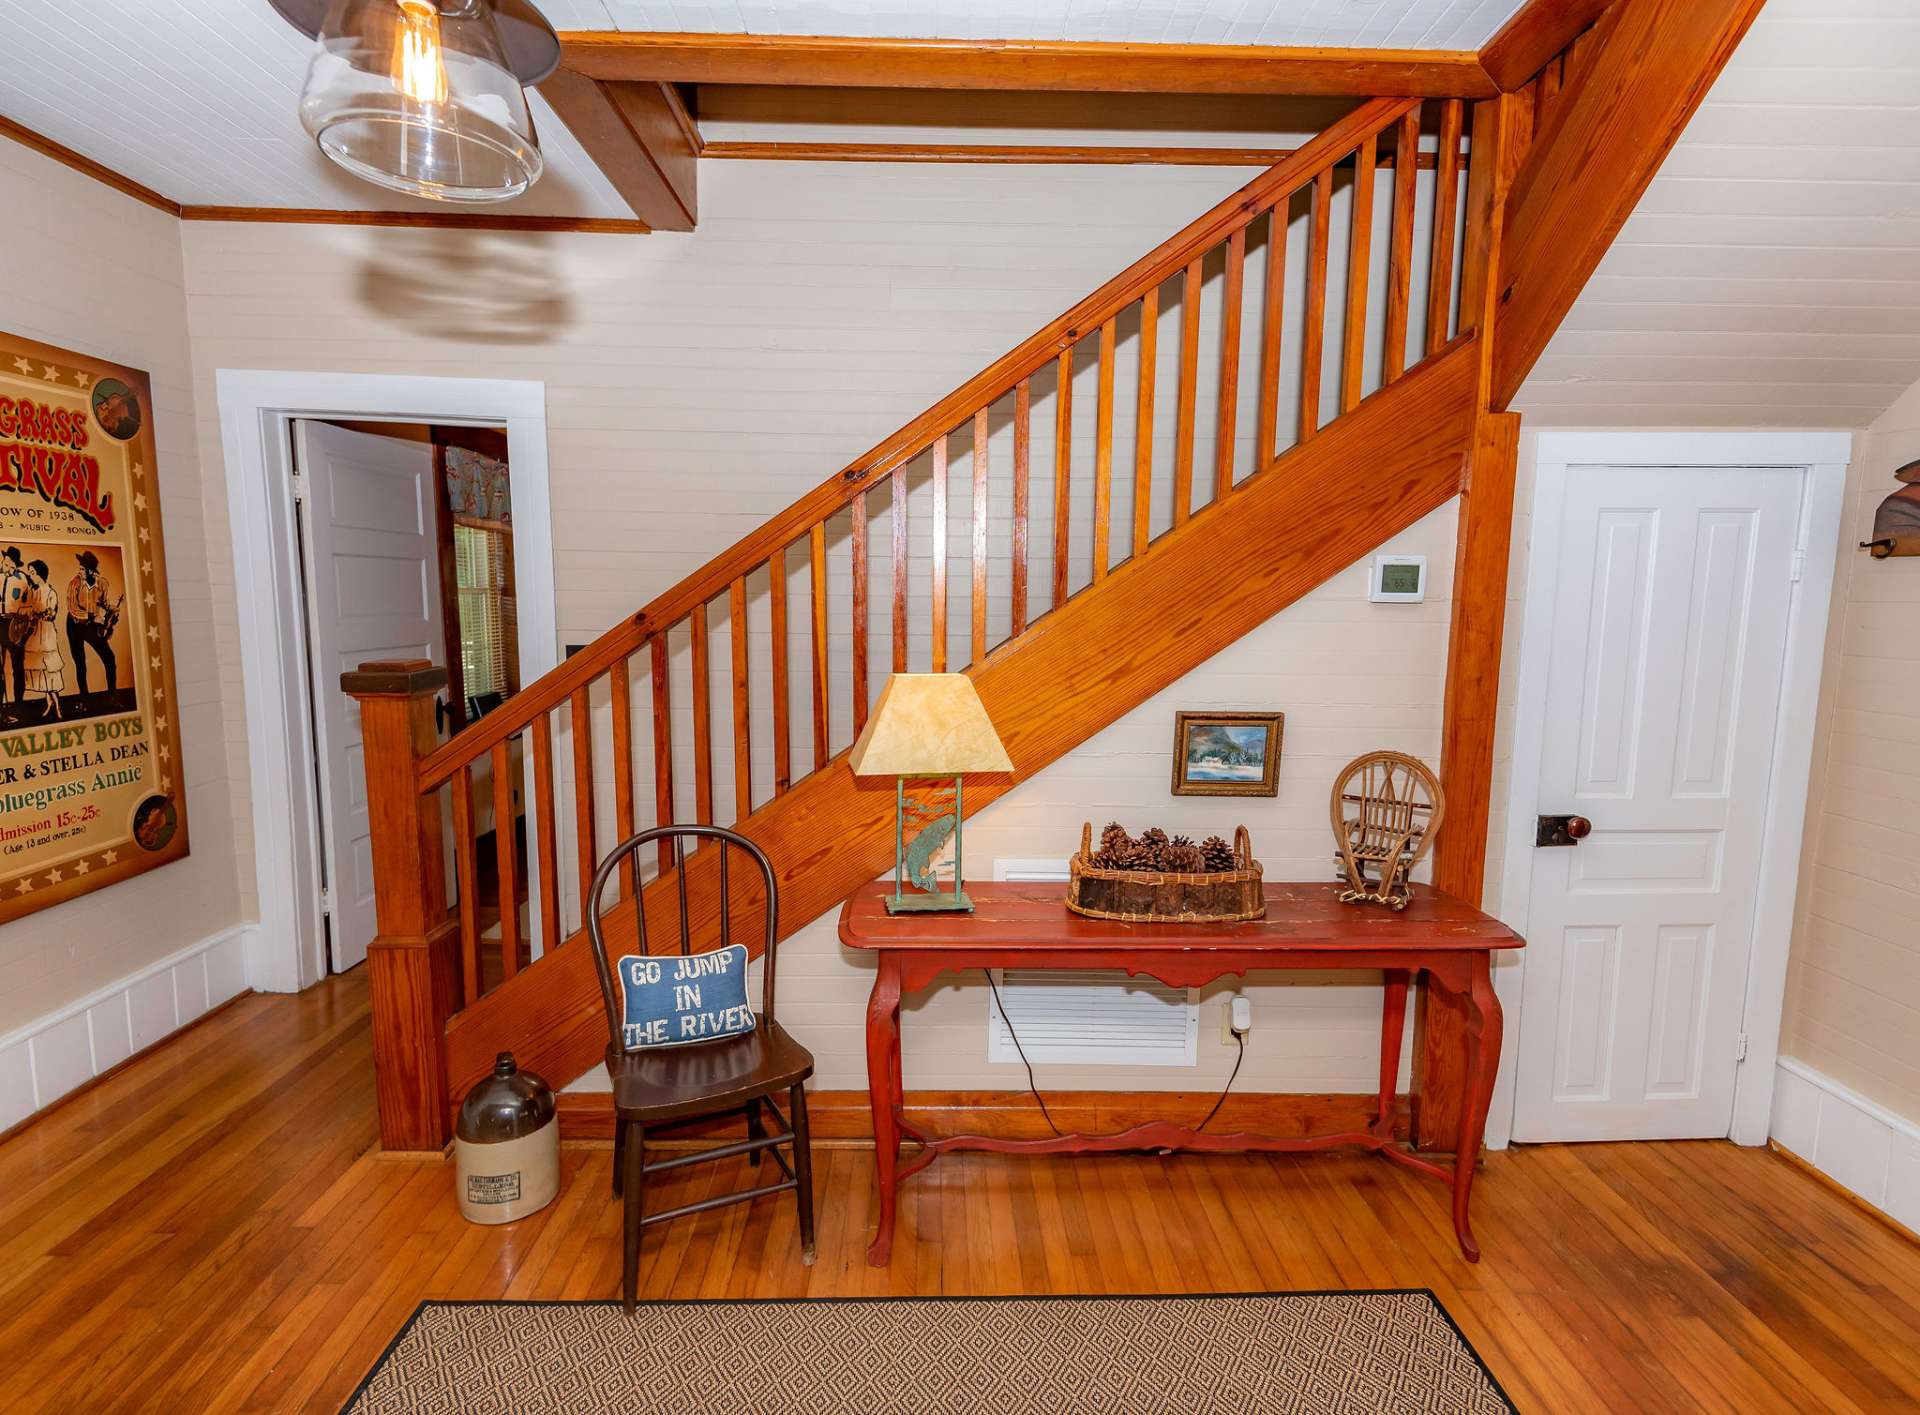 Notice the rich original woodwork and wood floors.